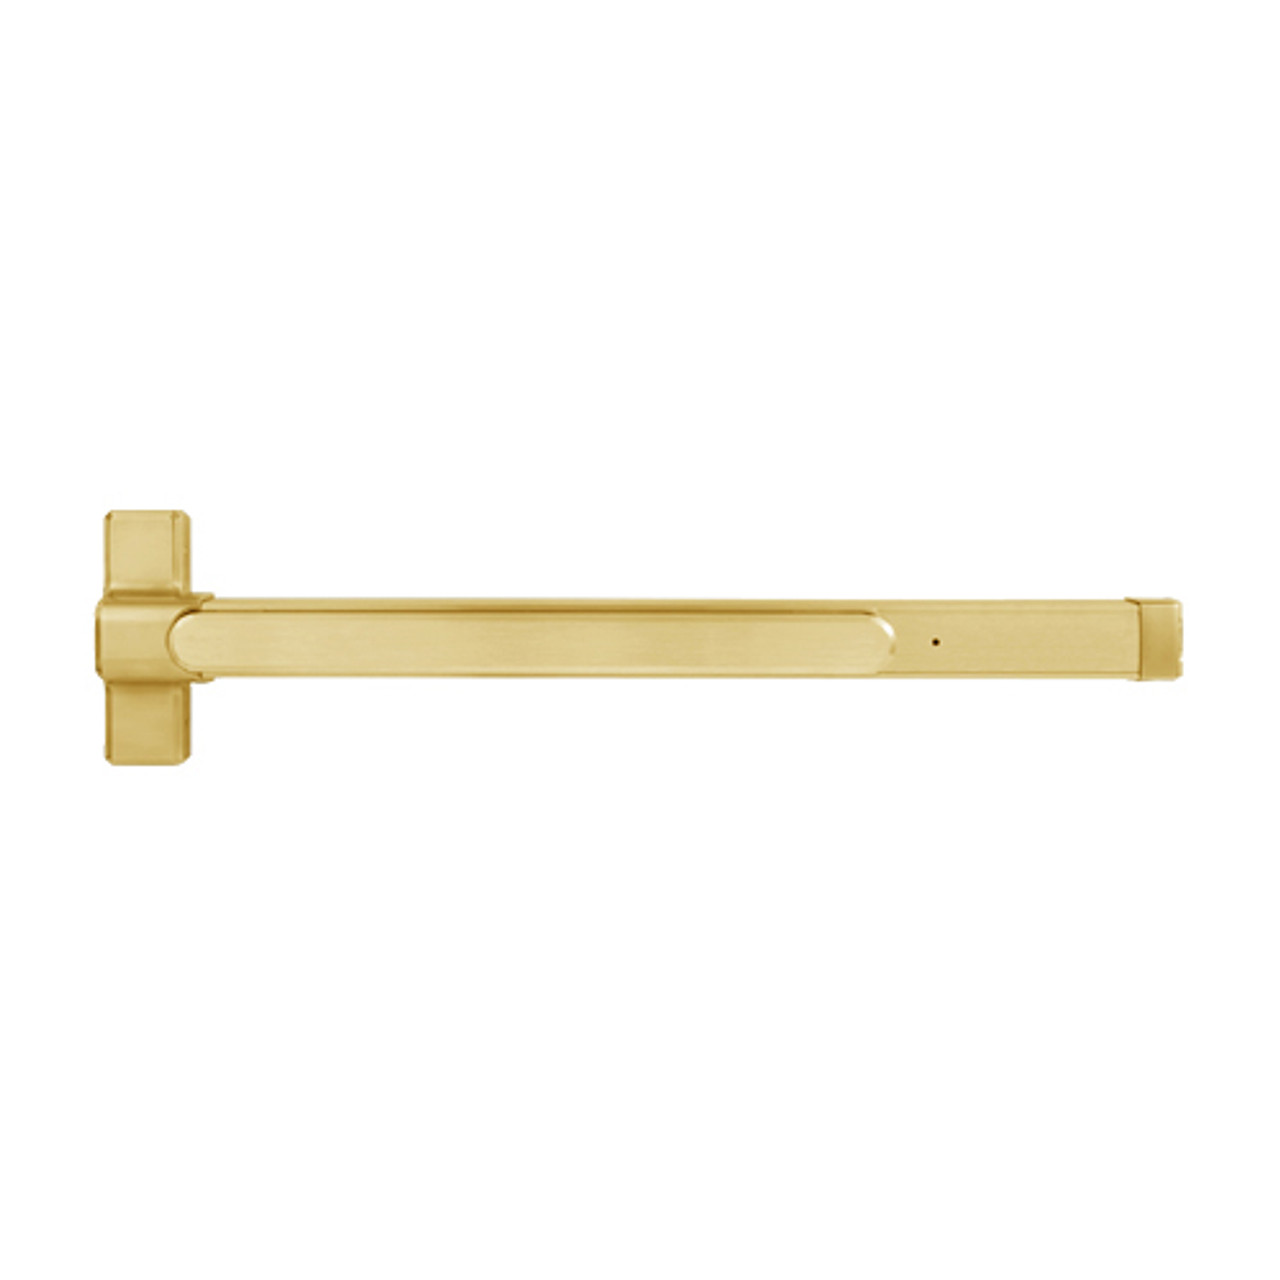 QED119LRX-36-8-605 Stanley QED100 Series Heavy Duty Surface Vertical Rod Fire Rated Exit Device in Bright Brass Finish